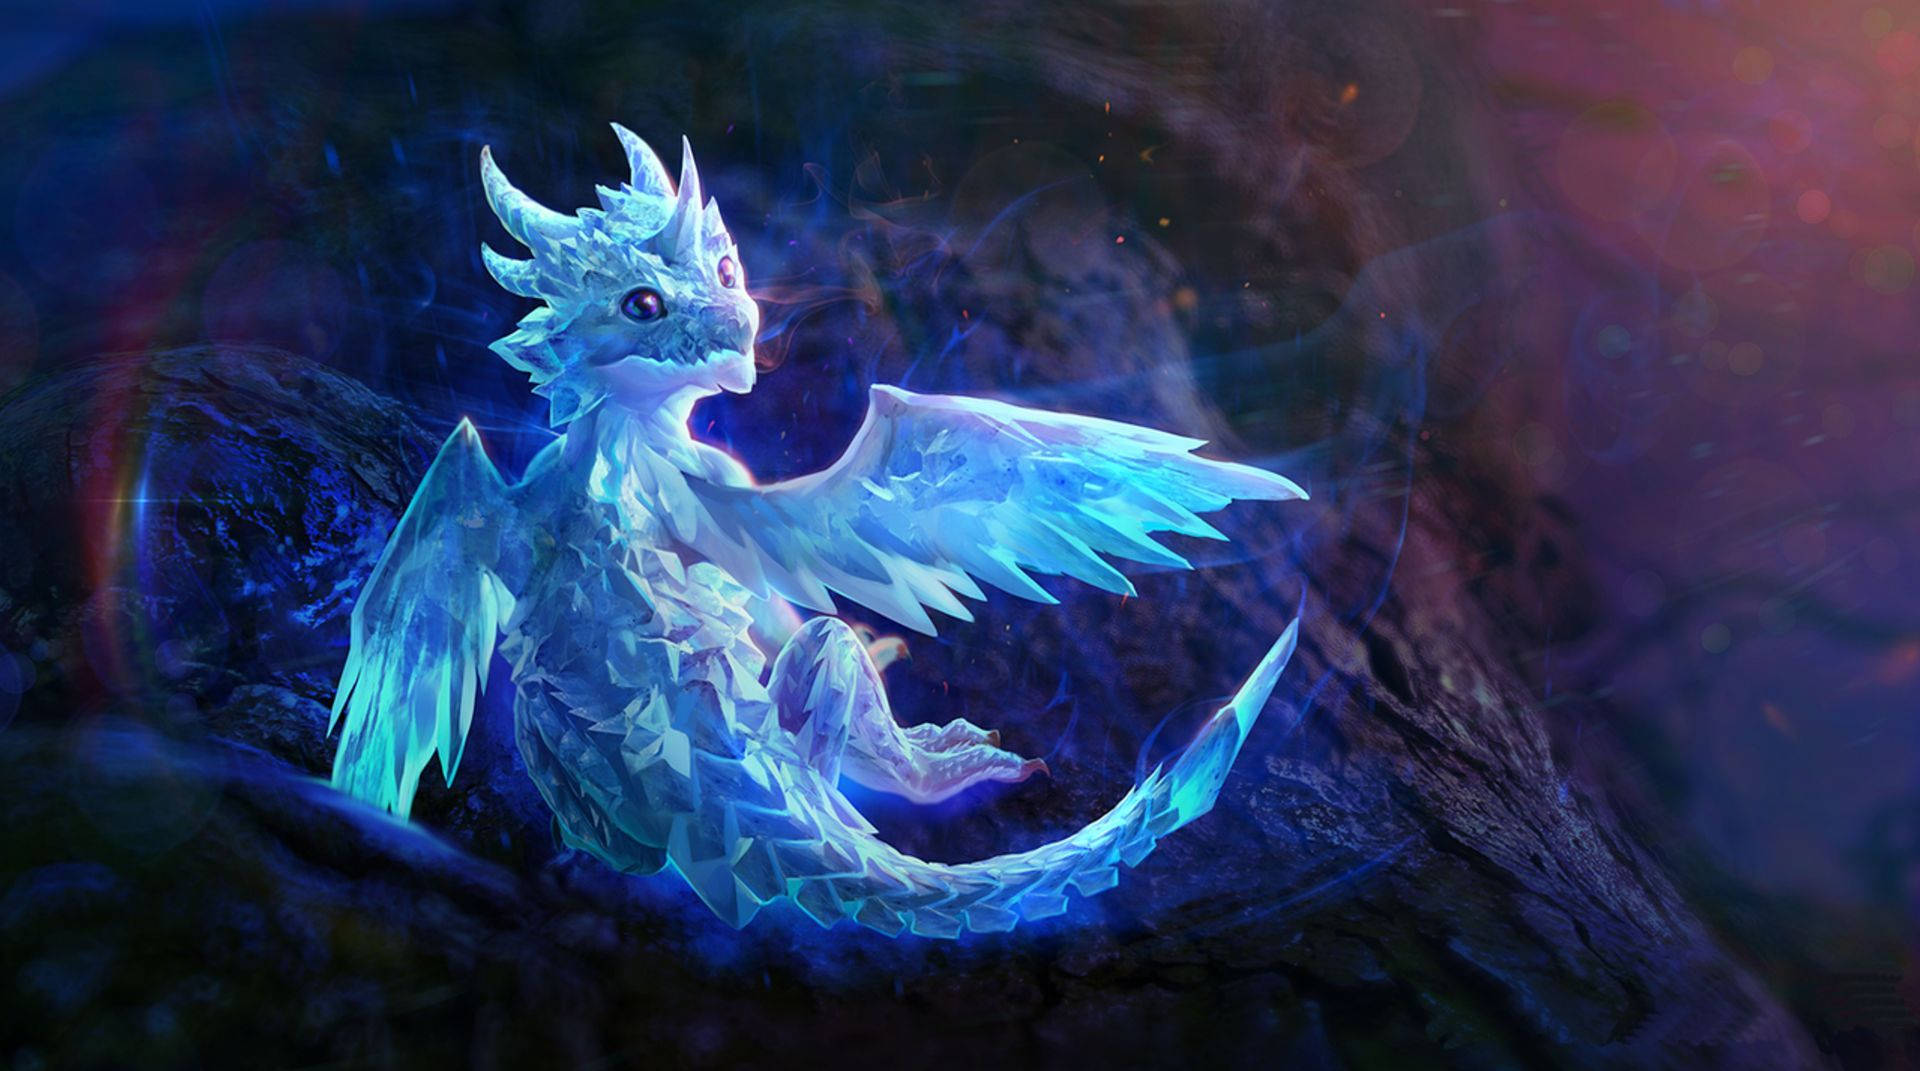 Crystal Blue Water Dragon Background